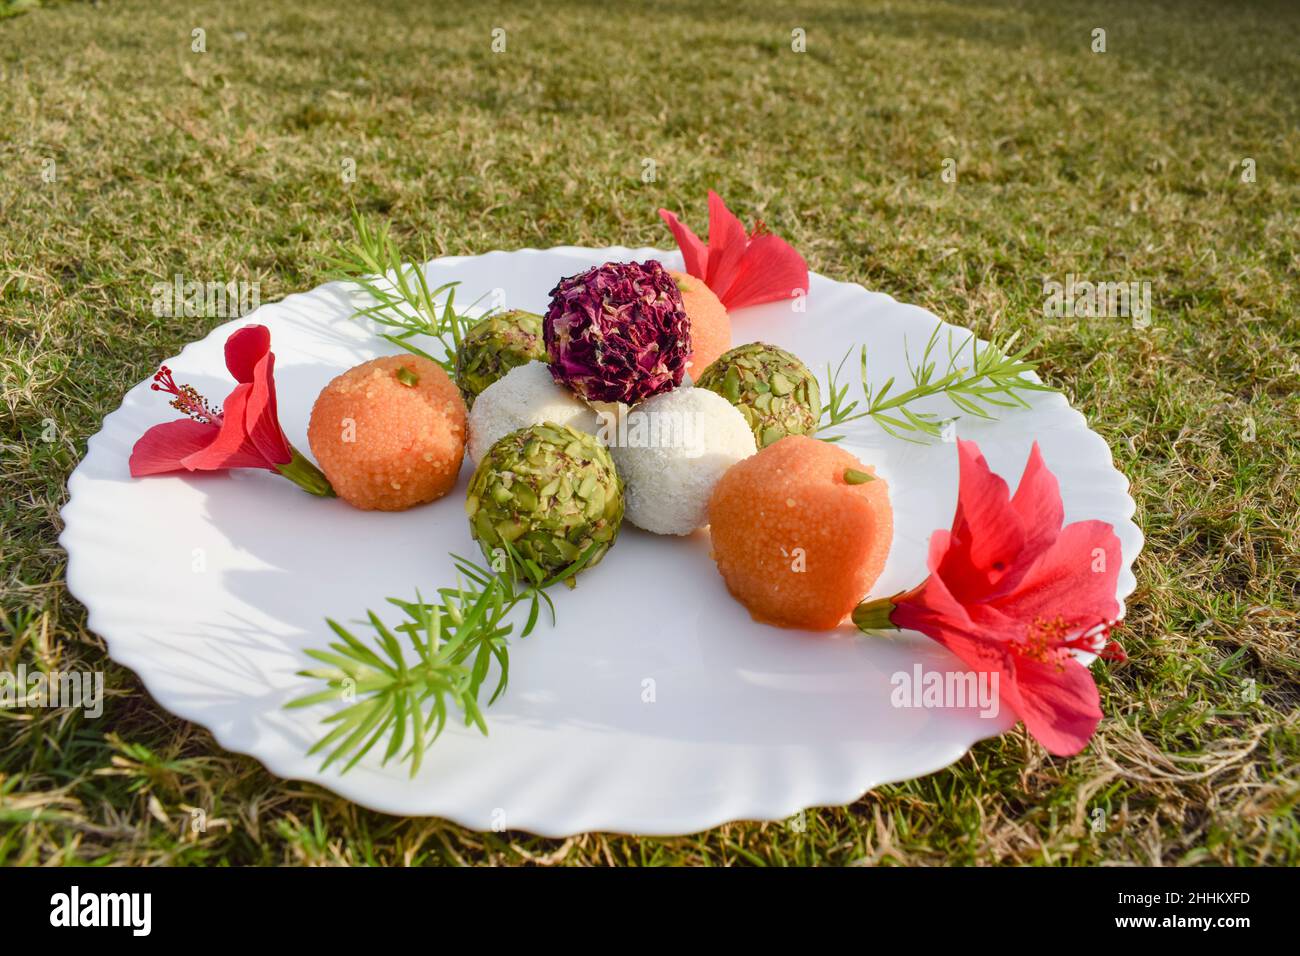 Tasty India flag tricolor Laddu or Ladoo sweet dish item for festive Republic day or India independence day celebration at home. Picnic food with tryp Stock Photo